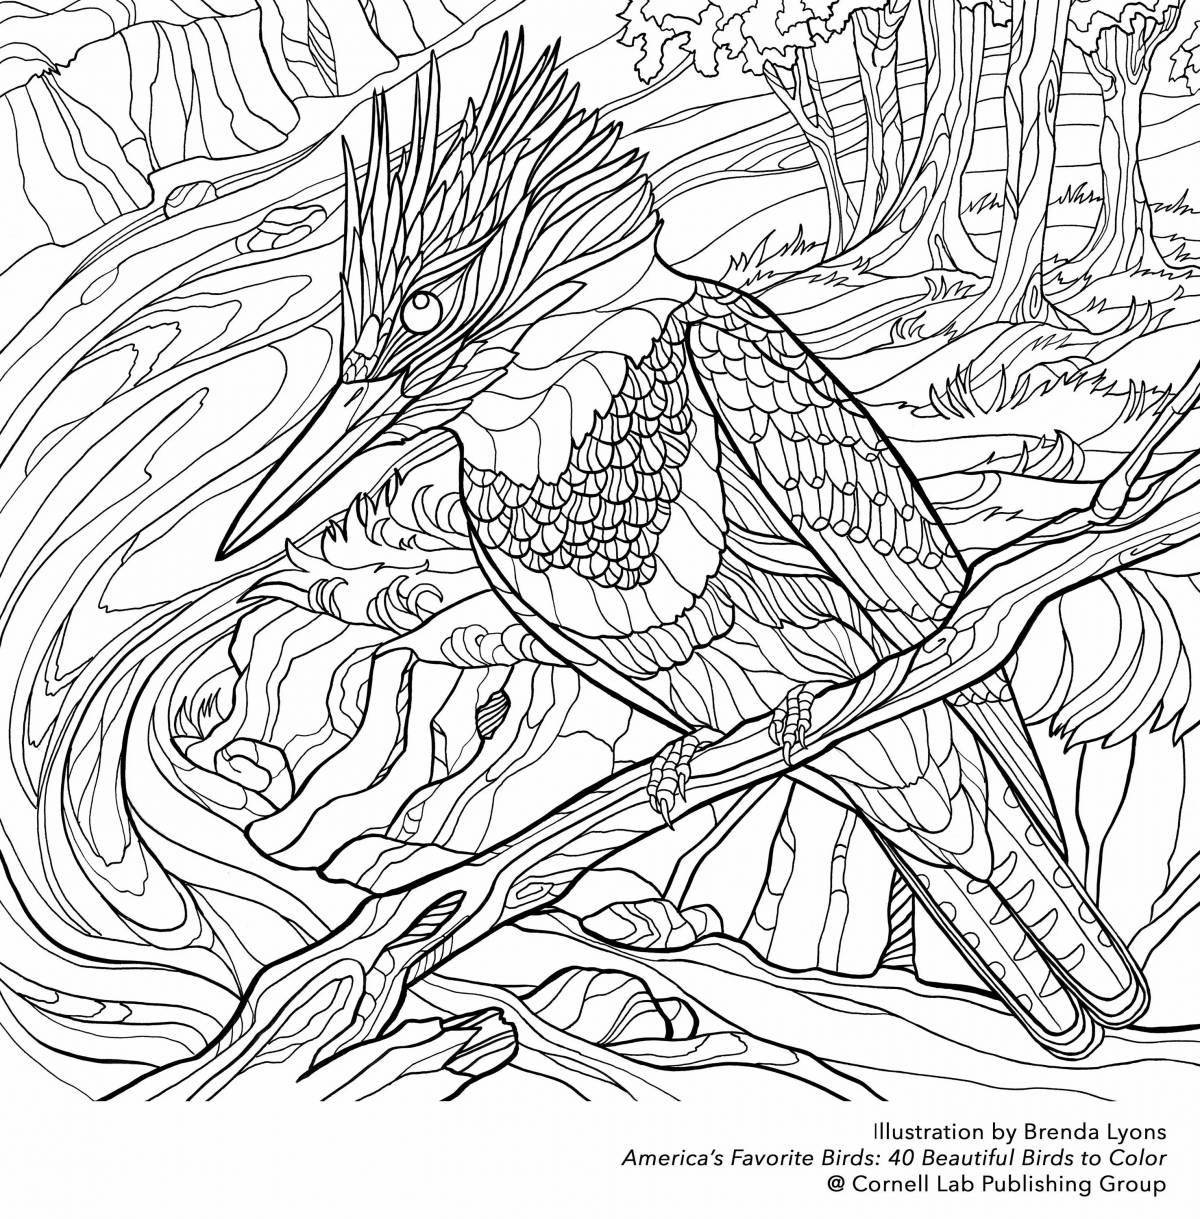 Adorable kingfisher coloring page